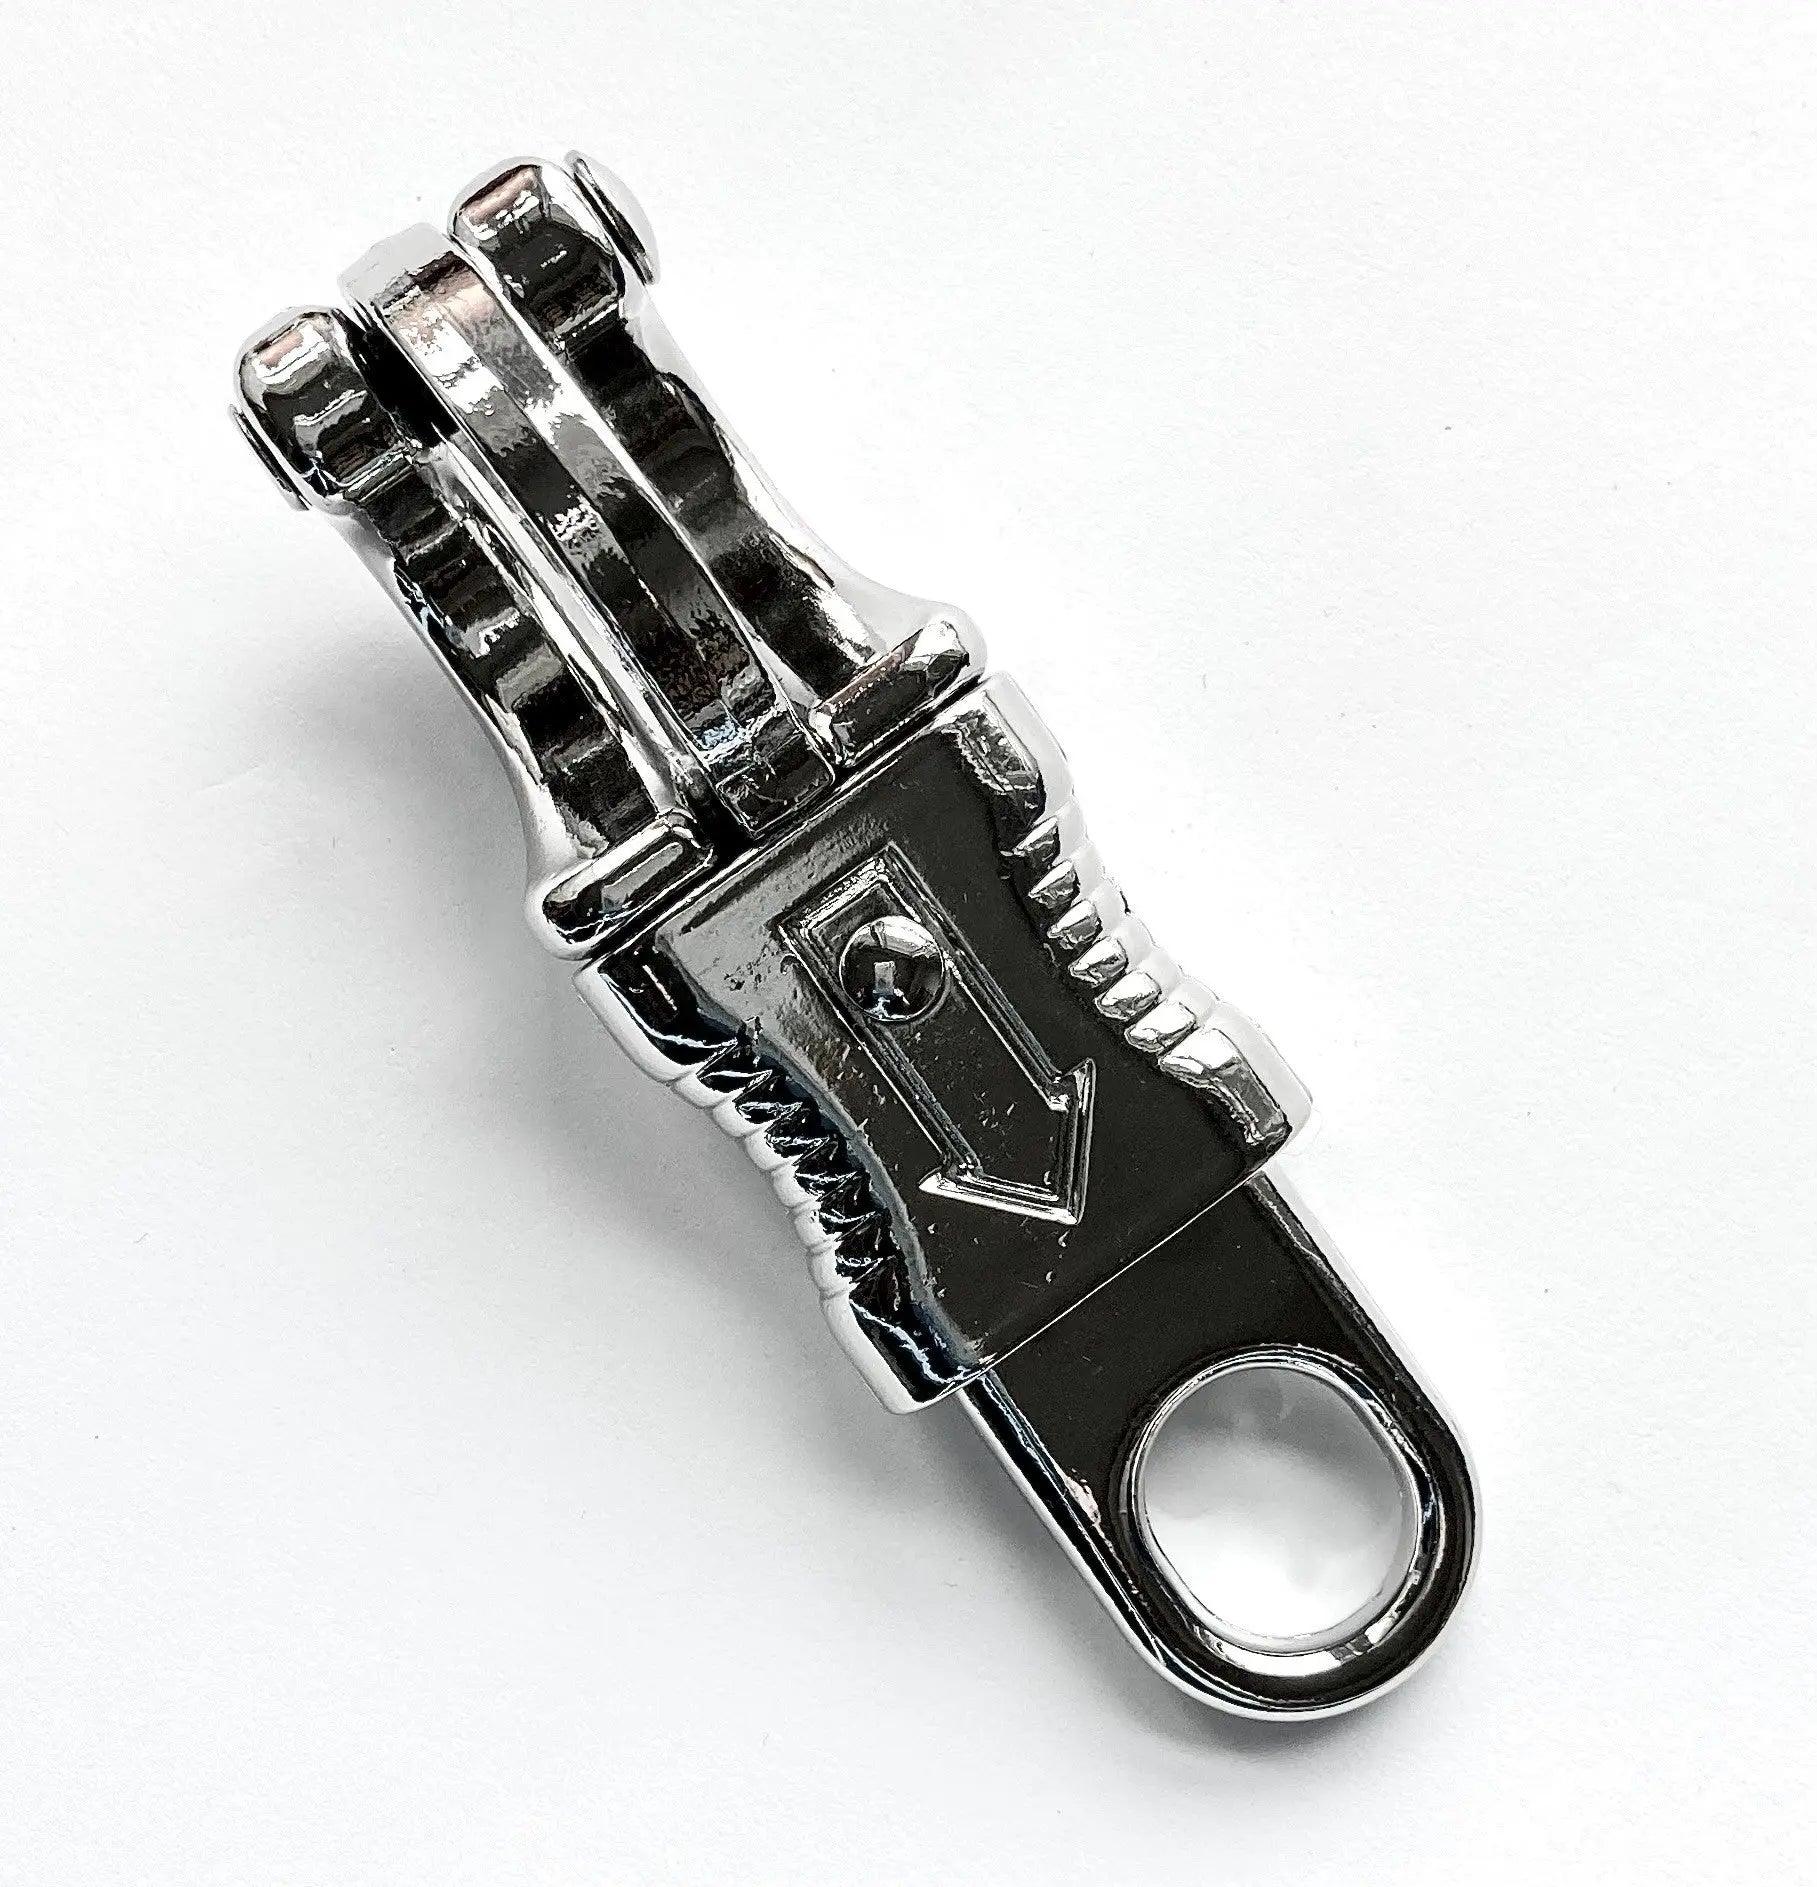 4 Inch Panic Swivel Snap Hook (1 Pack) - Paracord Galaxy